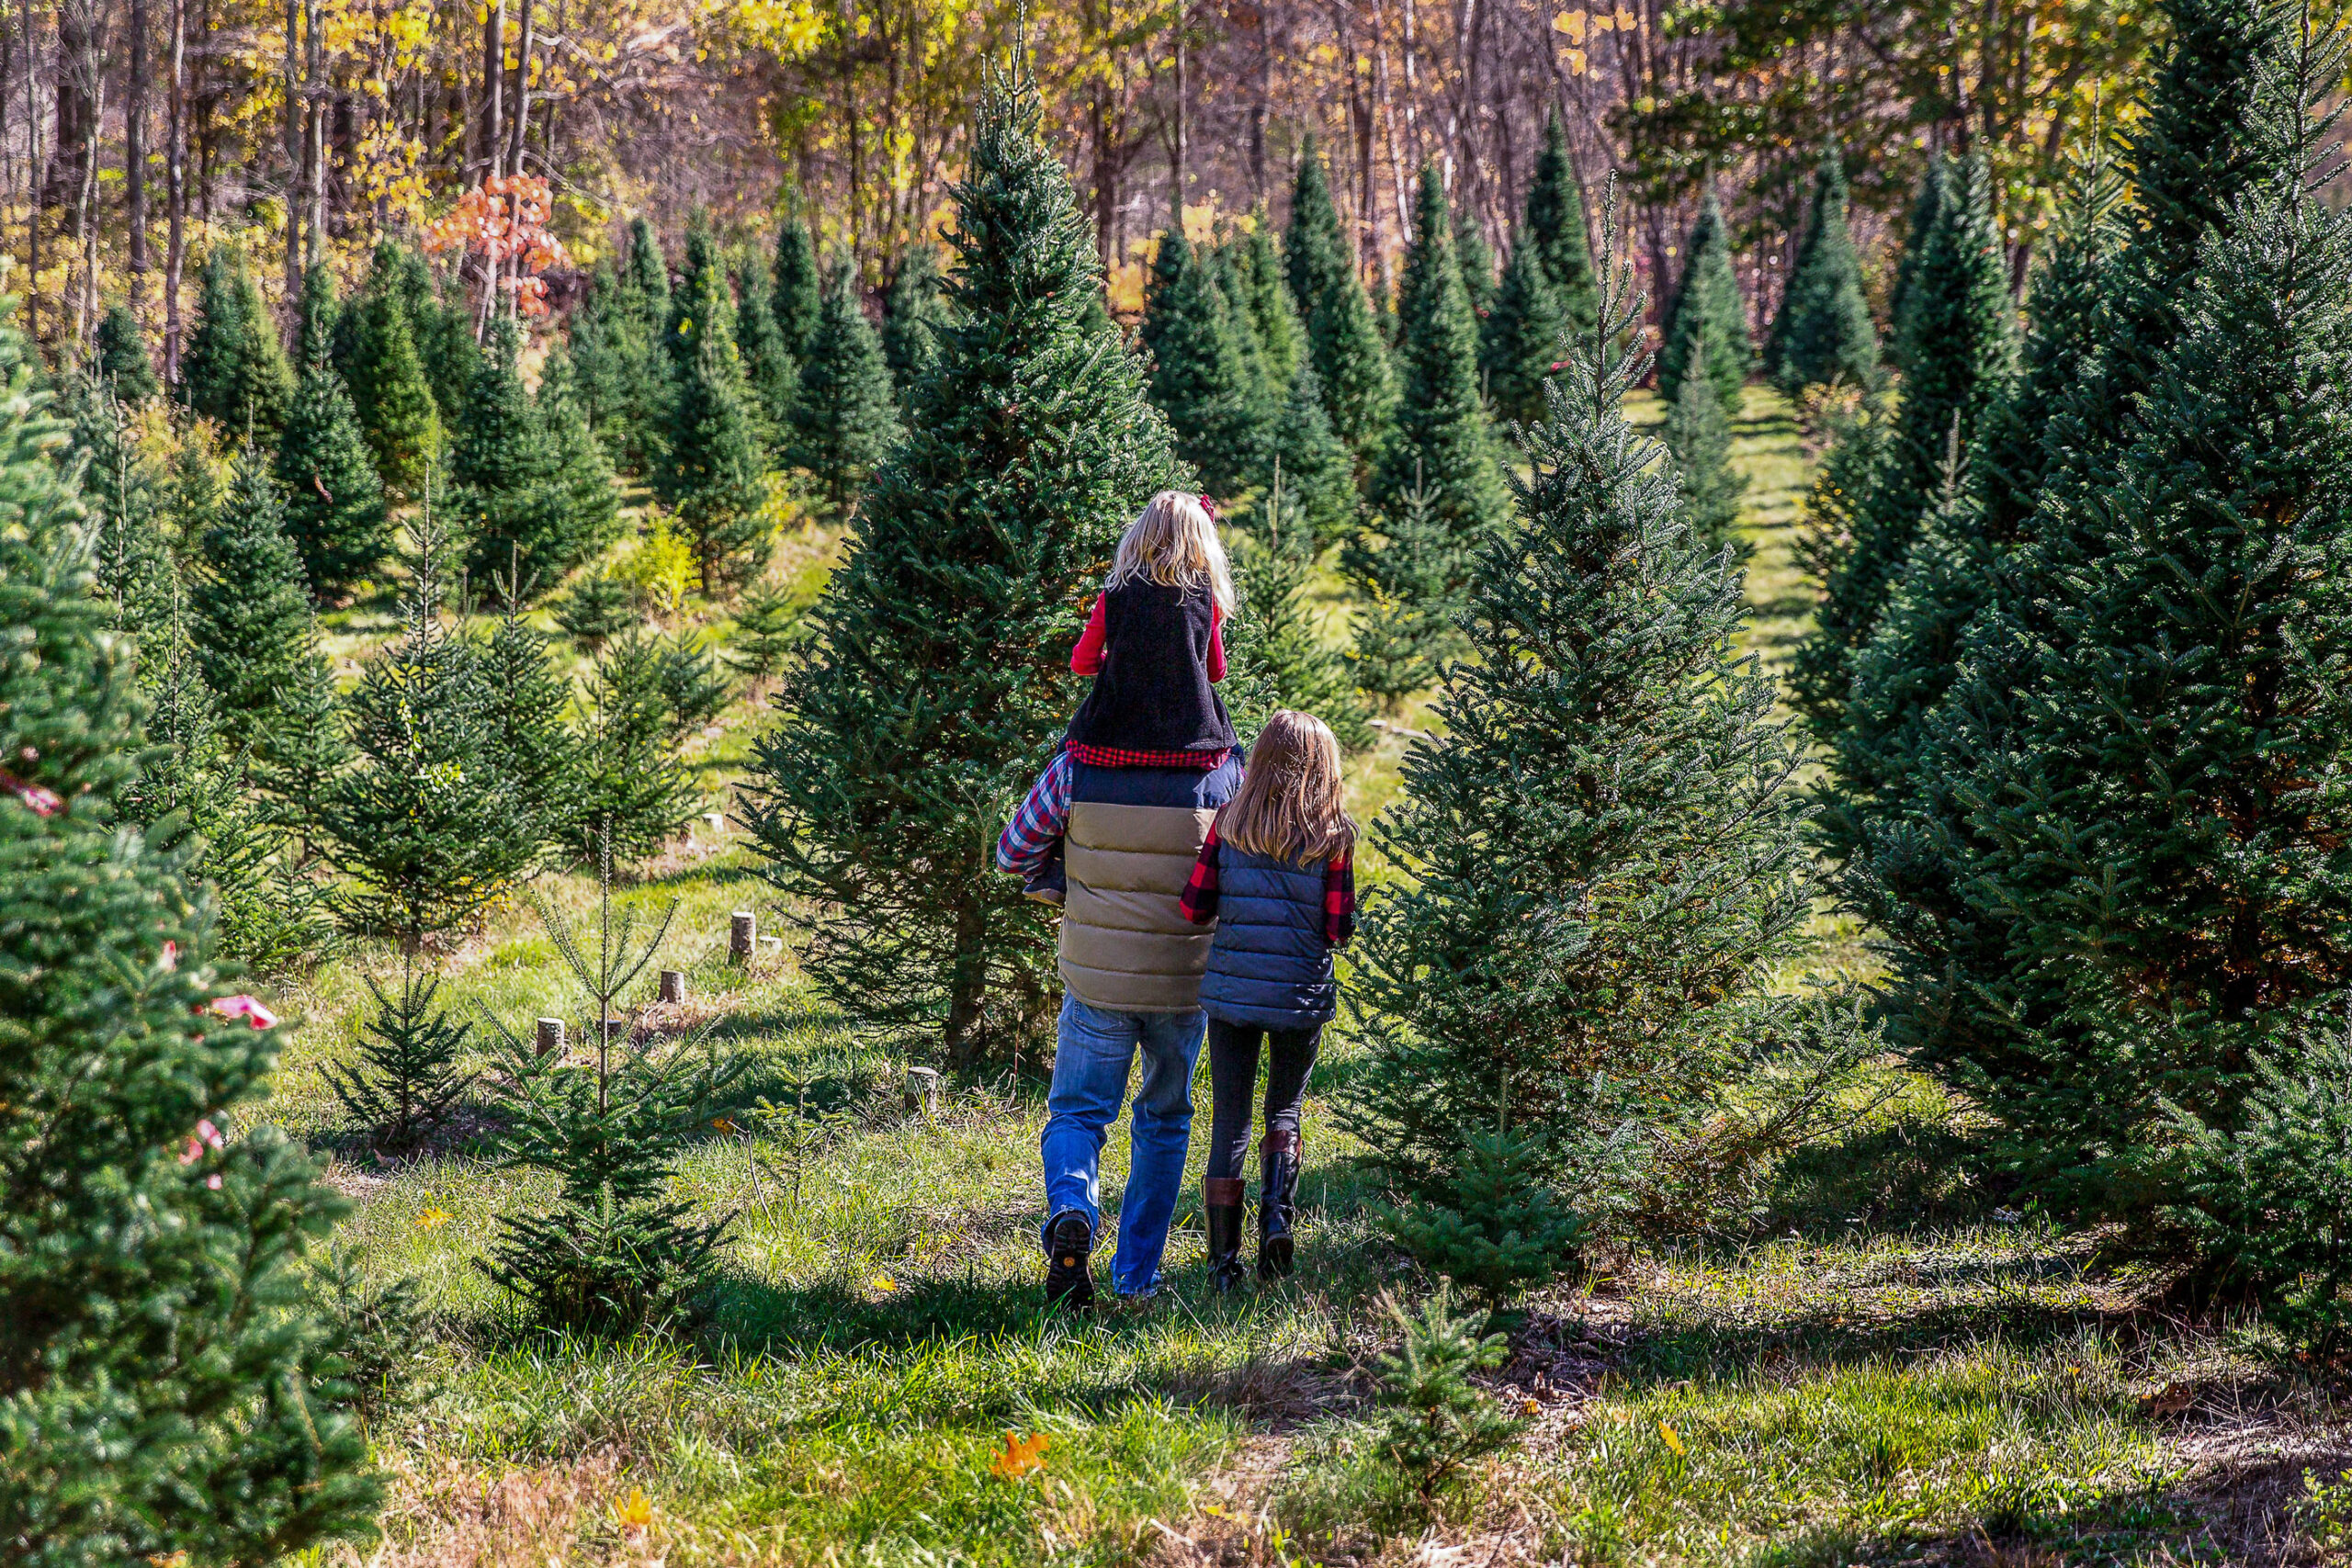 When Should You Buy A Christmas Tree?